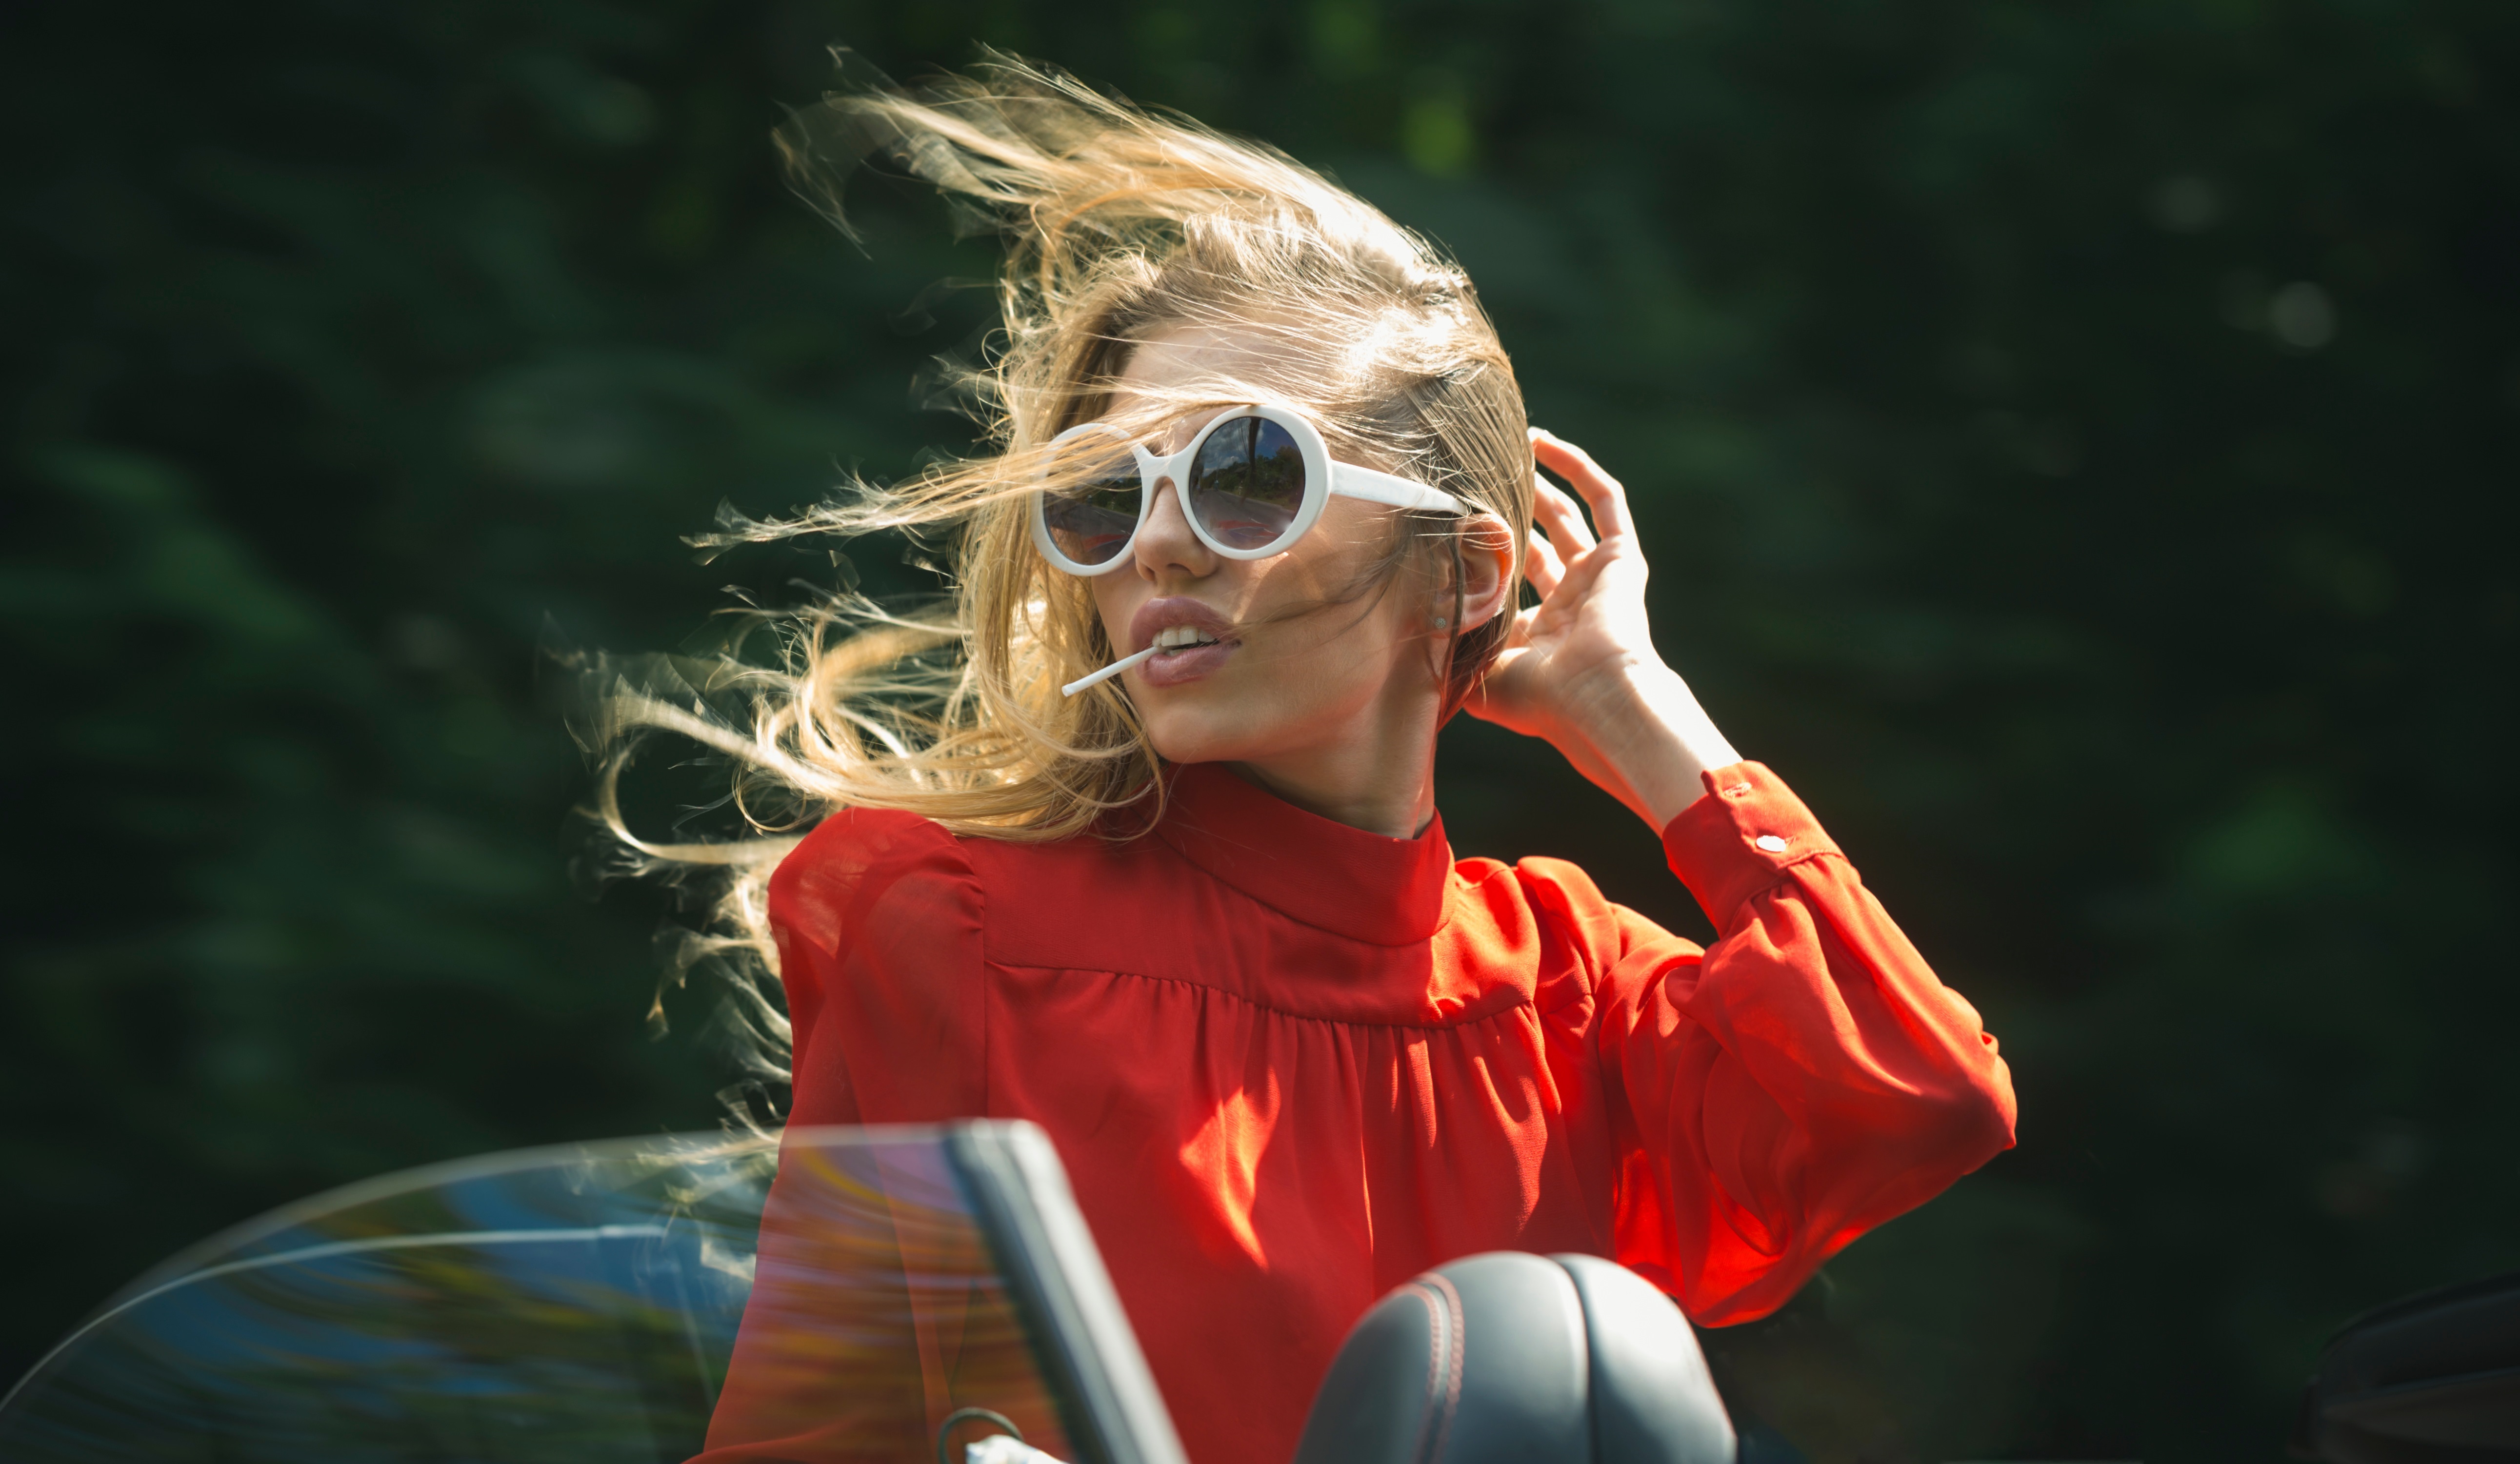 Glasses Vintage Red Women Makeup Summer Fashion Car Sunglasses Blond Hair Wind Dress Face Looking At 5166x3002